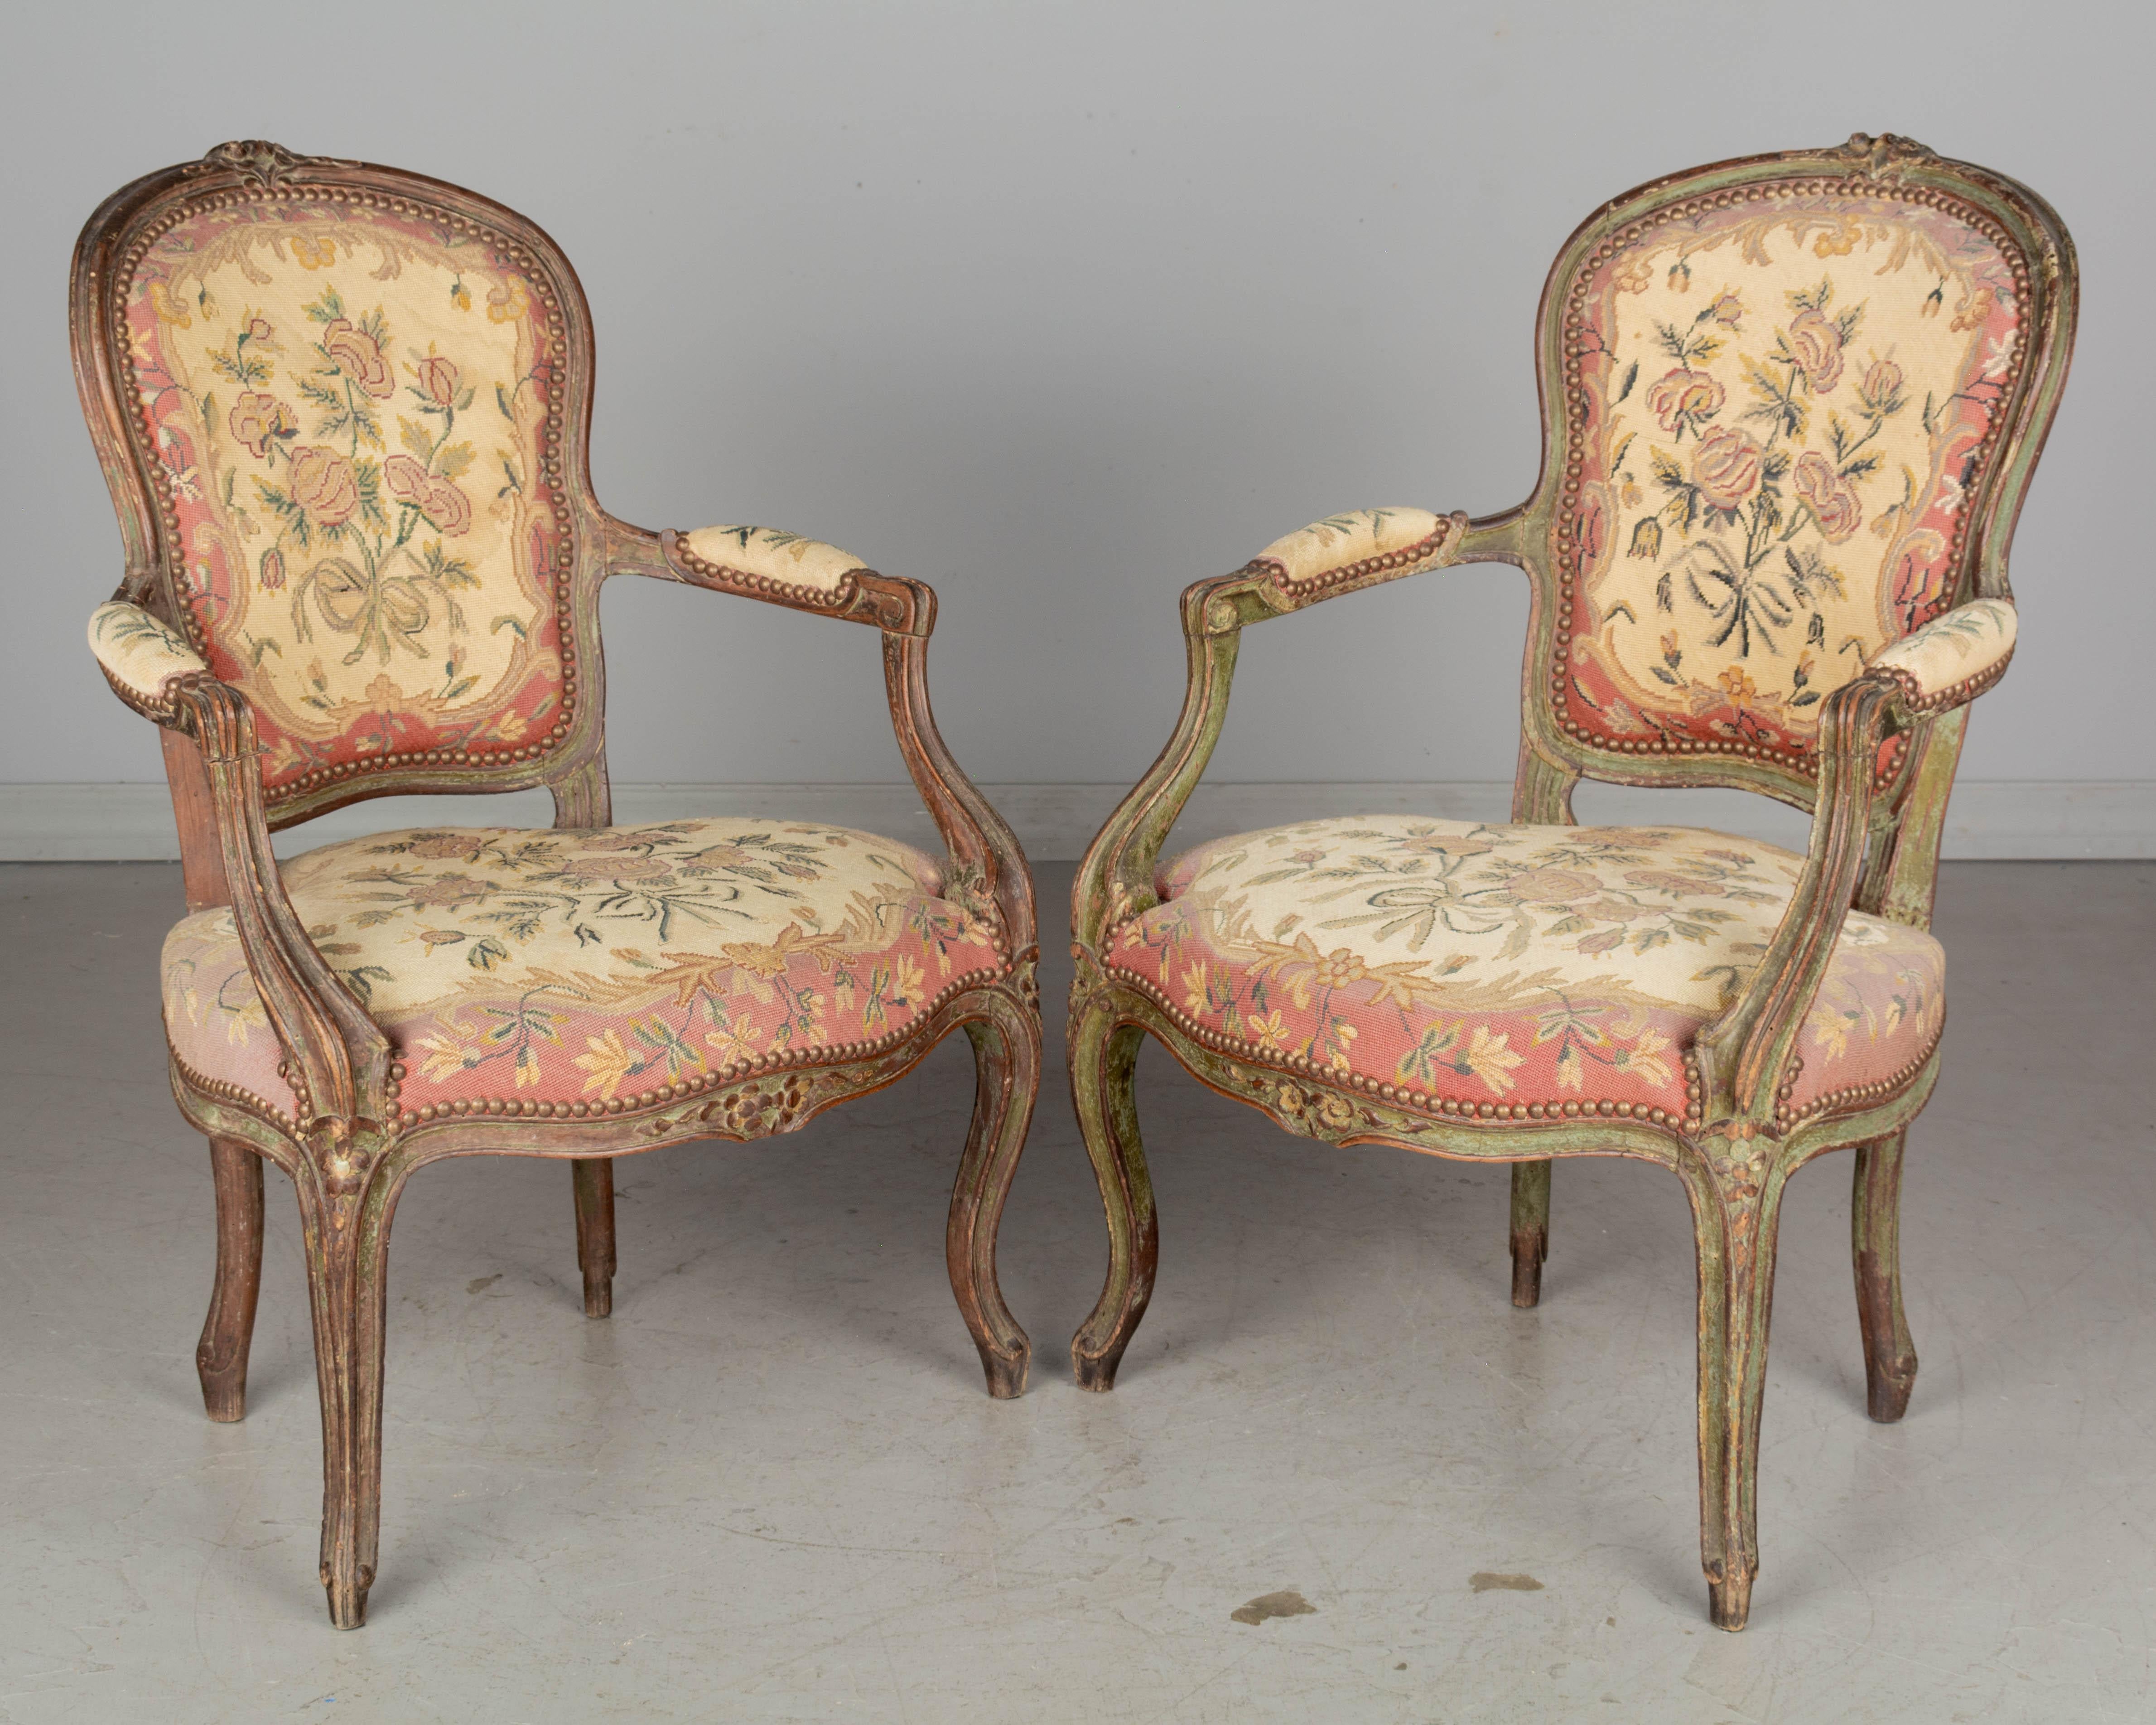 A pair of  18th century Louis XV French fauteuils, or armchairs, each with sturdy polychrome painted beechwood frames with hand-carved floral decoration. Upholstered in 19th century petit point tapestry. Pegged construction. Chairs sit low to the